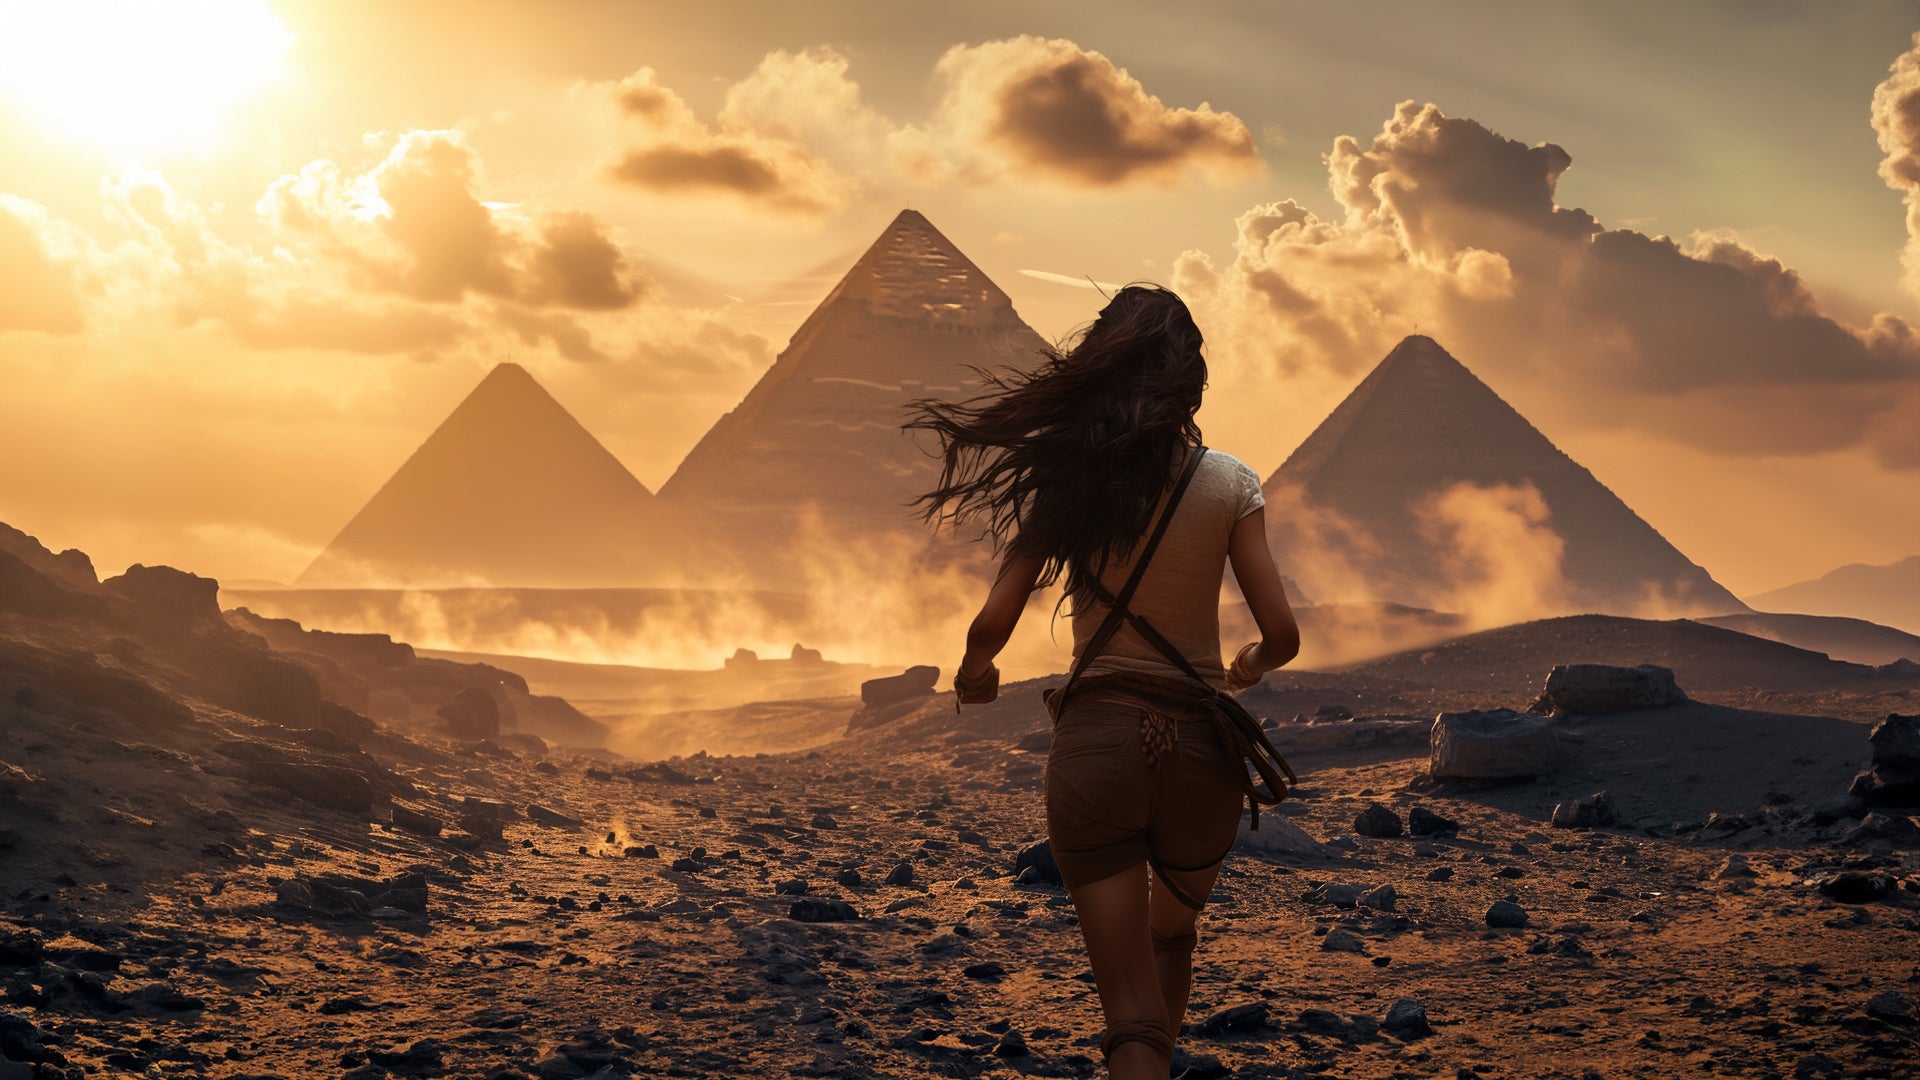 Eden Black runs towards the Pyramids of Egypt in order to save the world!